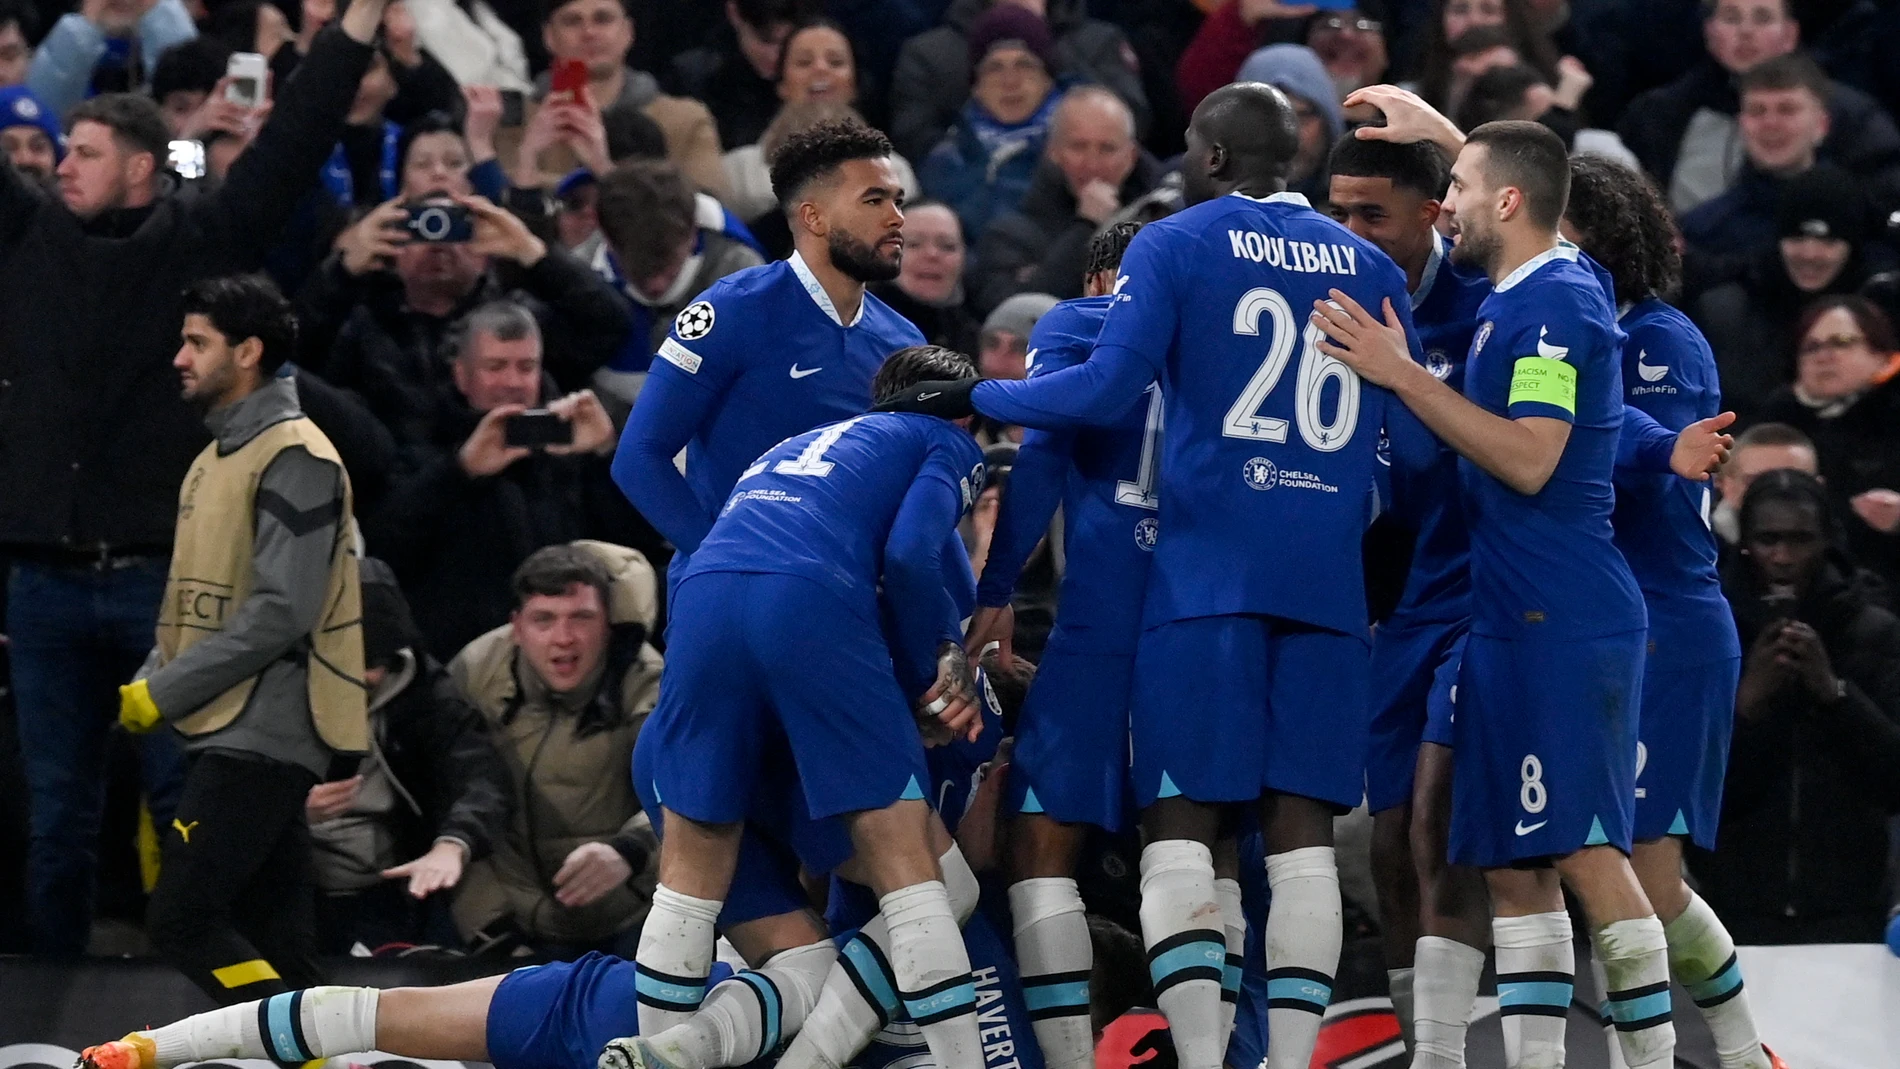 London (United Kingdom), 06/03/2023.- Players of Chelsea celebrate after scoring the 2-0 lead from penalty spot during the UEFA Champions League, Round of 16, 2nd leg match between Chelsea FC vs Borussia Dortmund in London, Britain, 07 March 2023. (Liga de Campeones, Rusia, Reino Unido, Londres) EFE/EPA/Neil Hall 